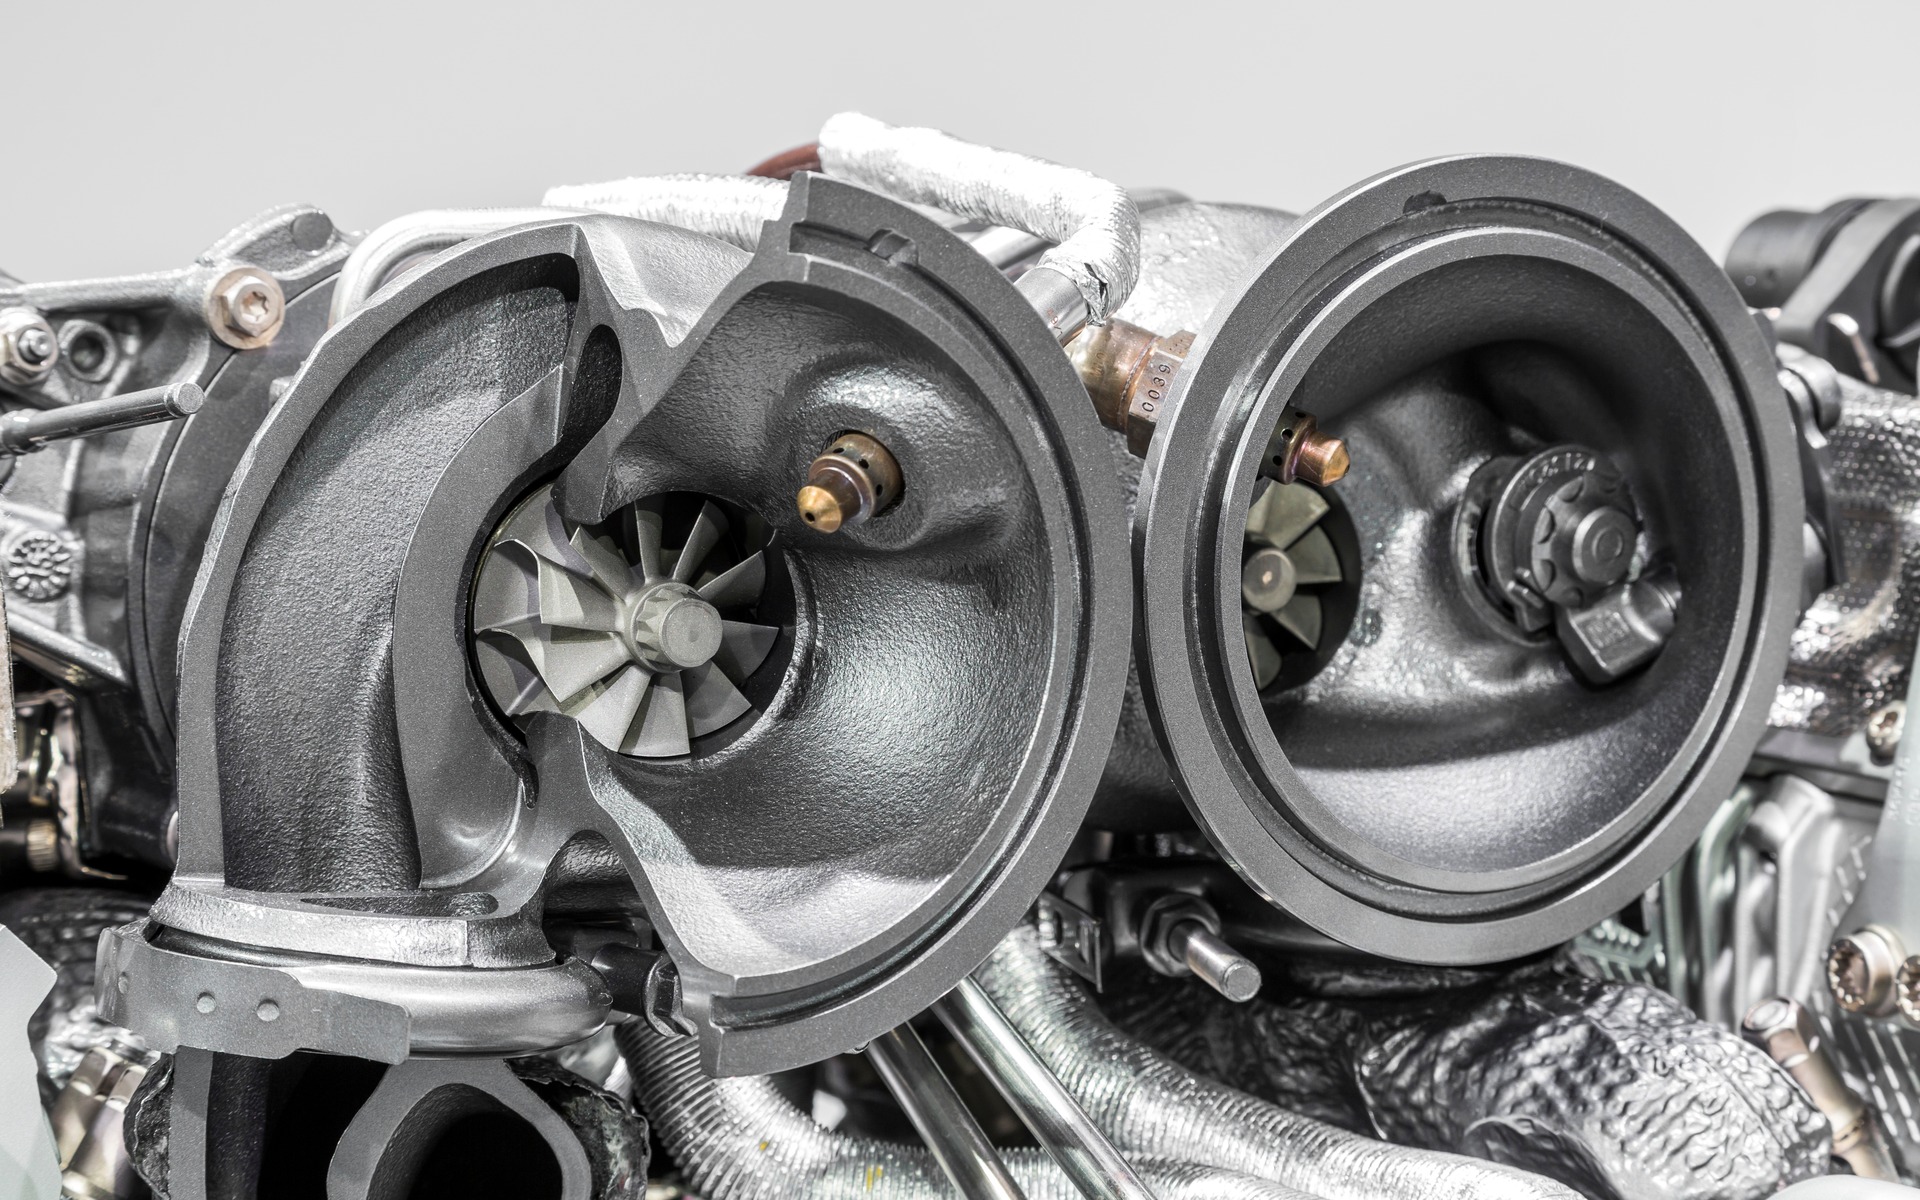 The two turbochargers of the 2017 Porsche Panamera's engines